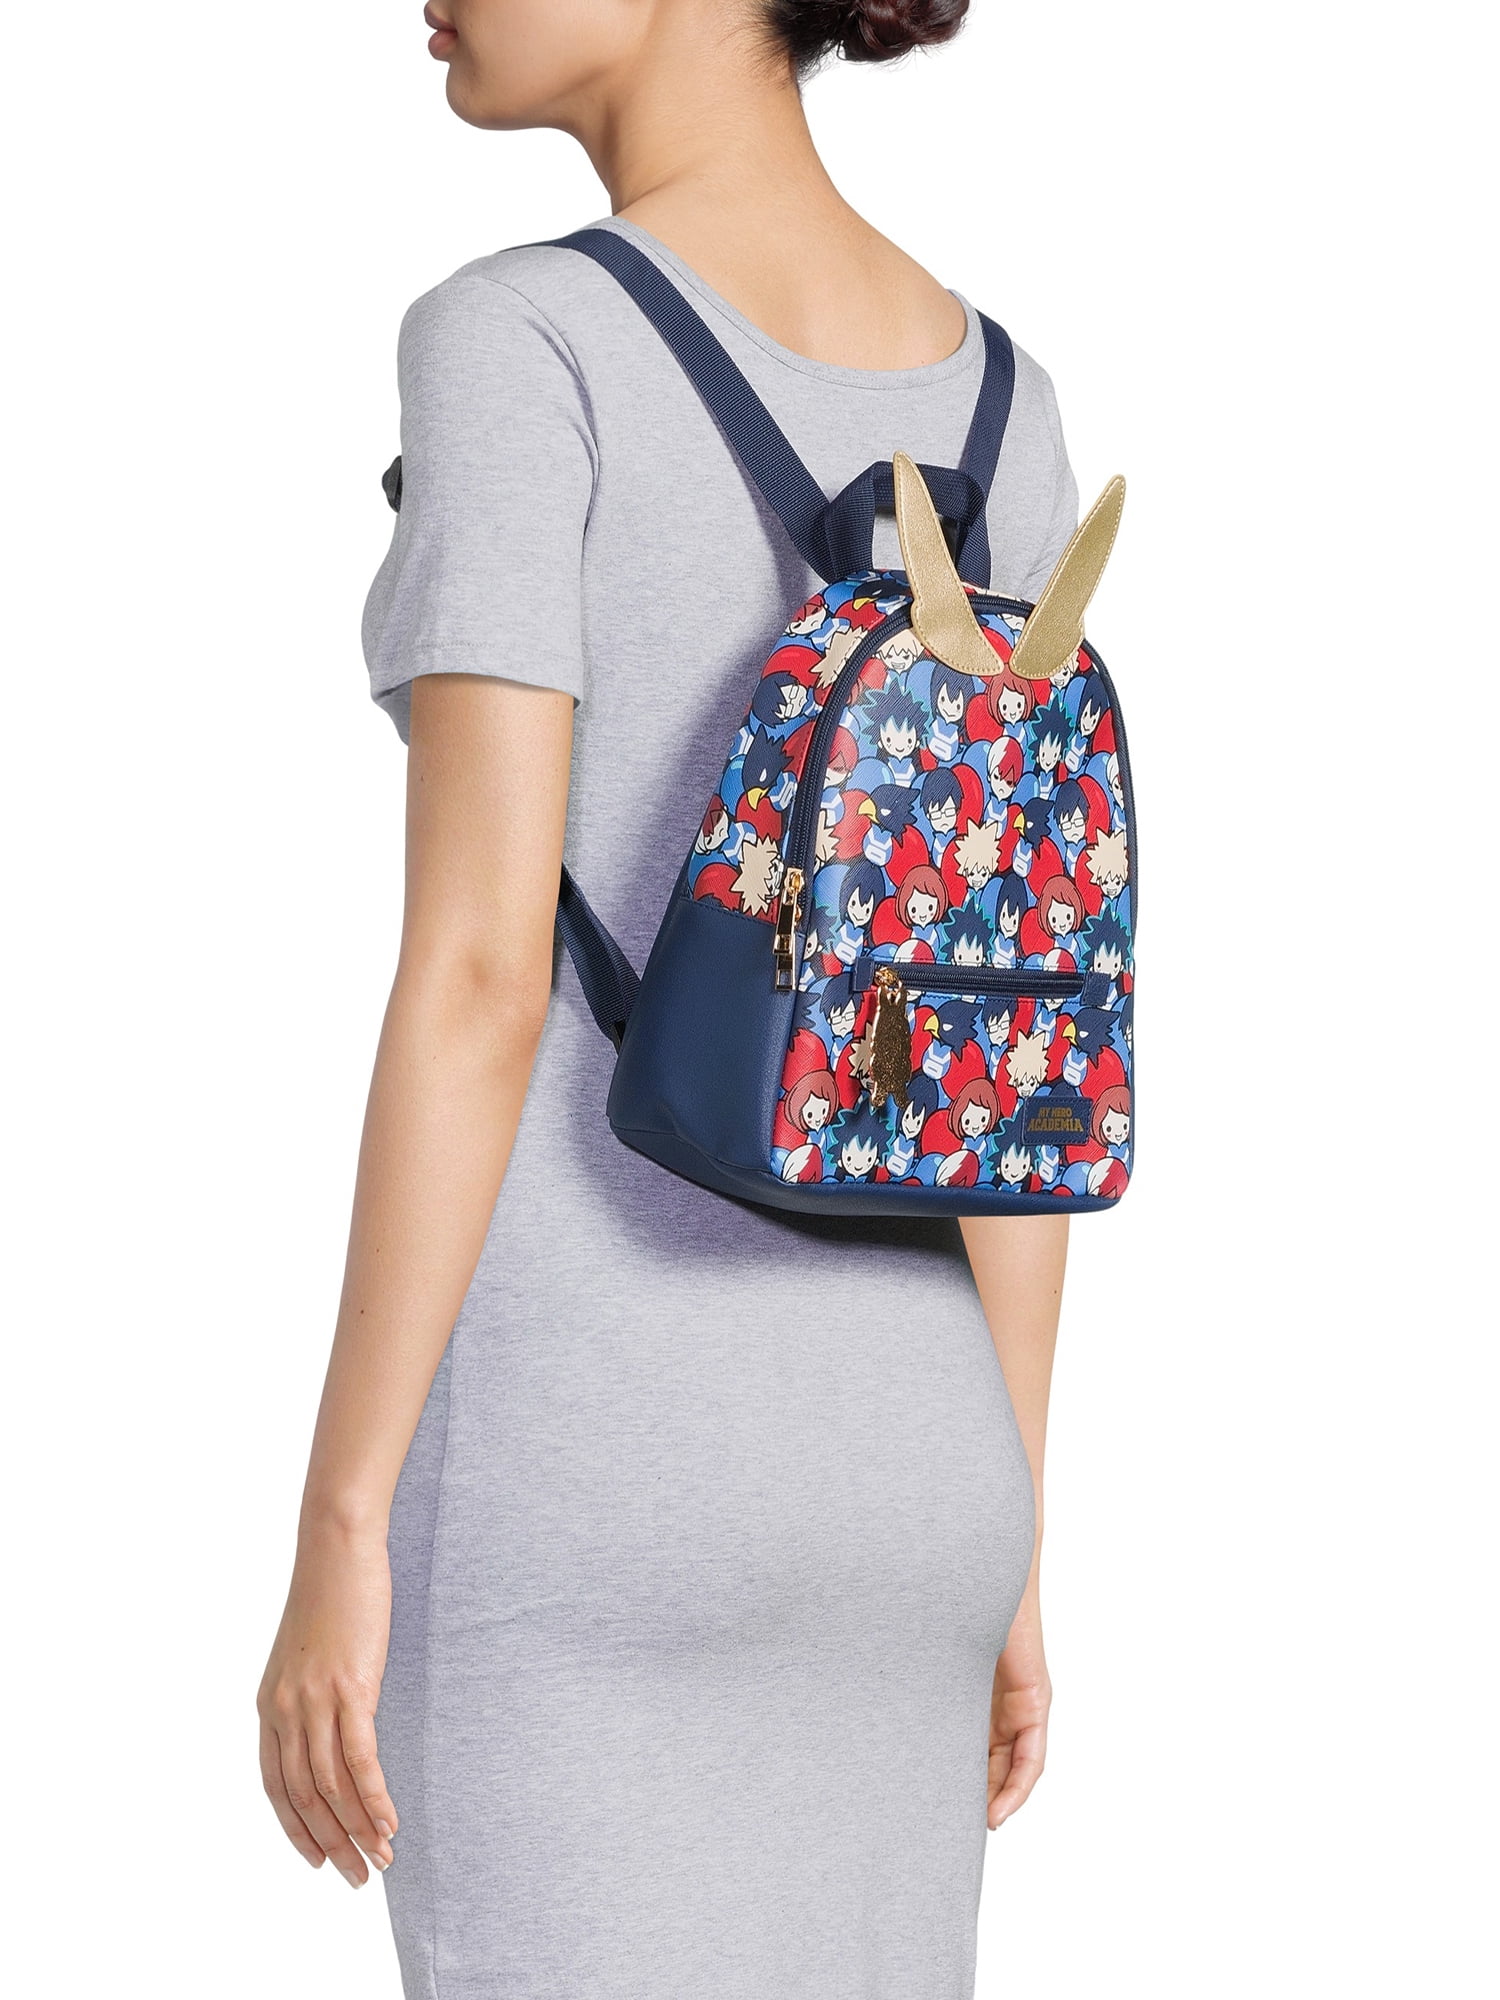 LF Pokemon Ombre Mini Backpack by LOUNGEFLY | Barnes & Noble®